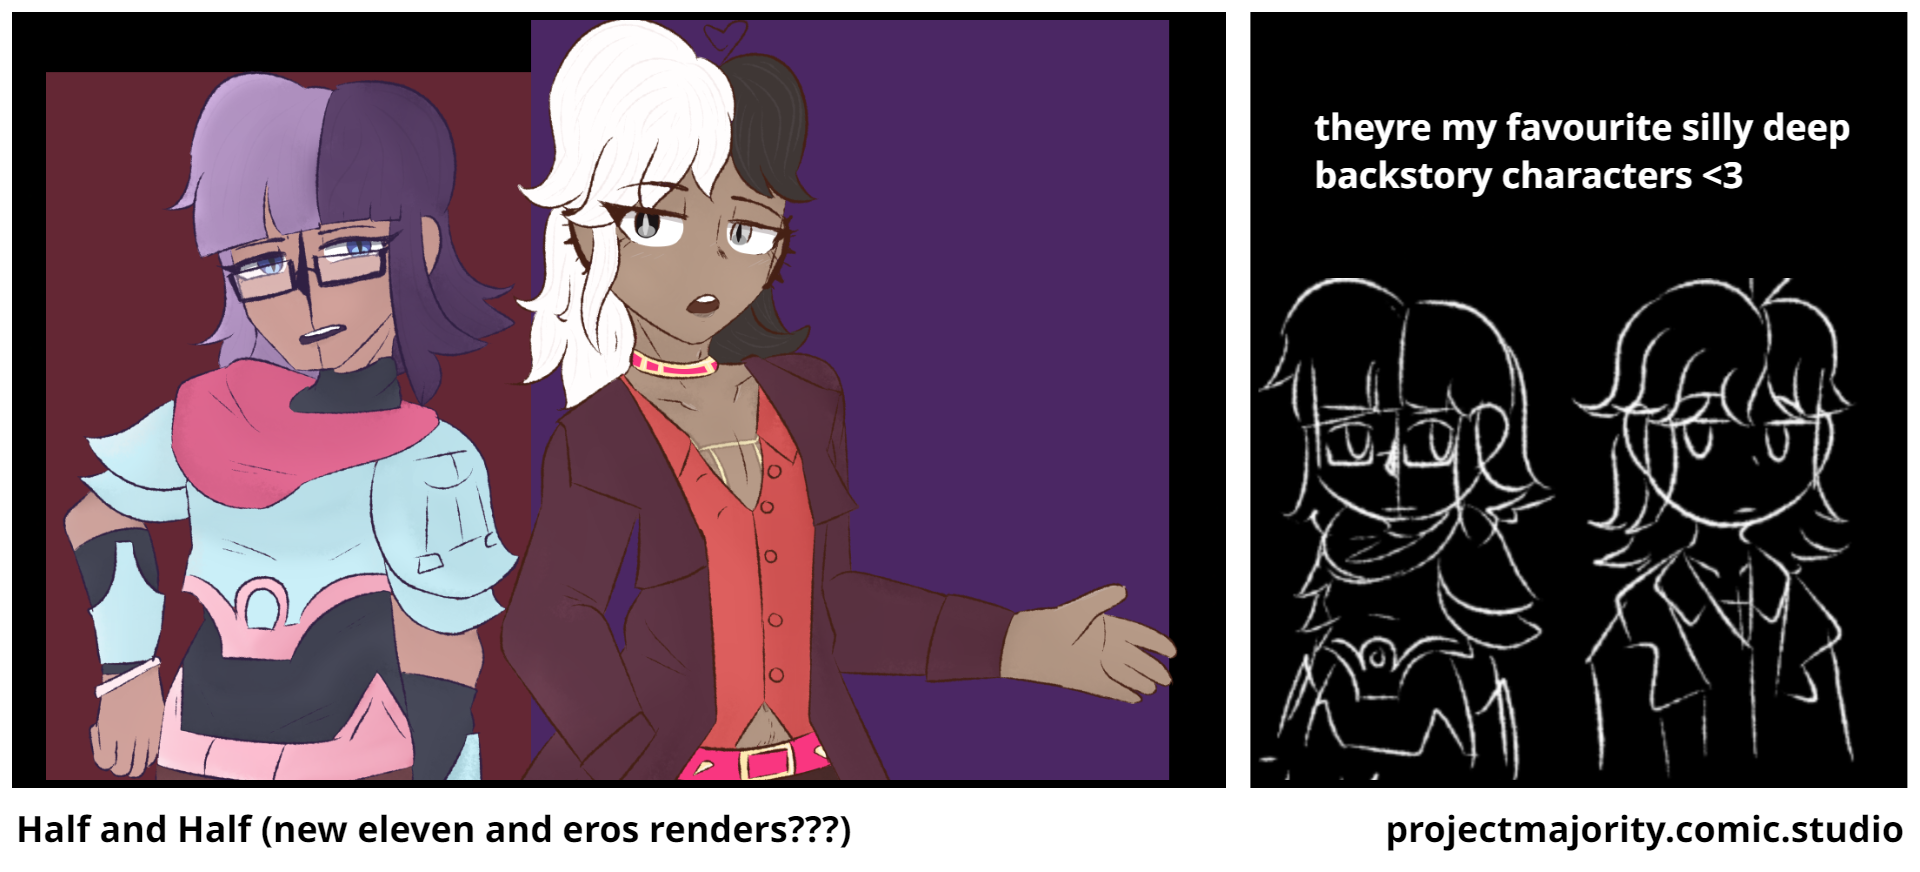 Half and Half (new eleven and eros renders???)